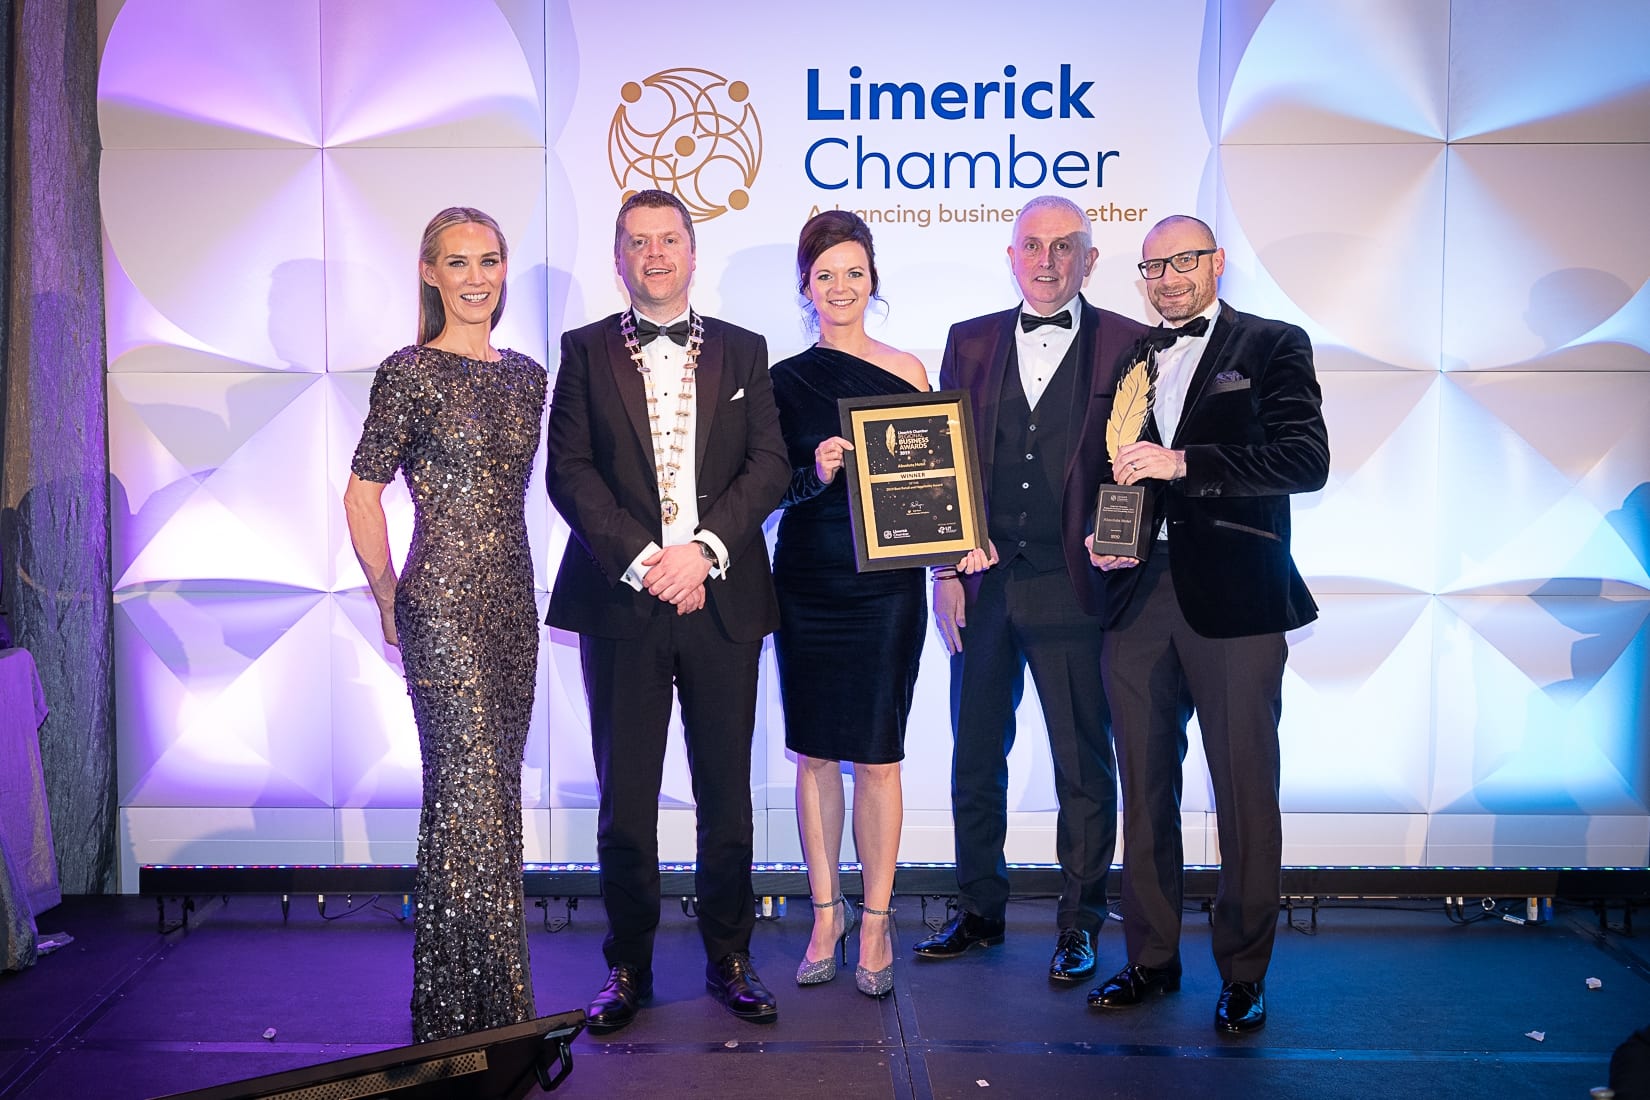 No repro fee-Limerick Chamber President’s Dinner
and Limerick Chamber Regional Business Awards 2019 which was held in the Strand Hotel on Friday 15th November /Best Retail and Hospitality /  - From Left to Right:  Dee Ryan - CEO Limerick Chamber, Eoin Ryan - President Limerick Chamber, Melanie Lennon - Winner / Absolute Hotel, Liam Hession - BDO / Sponsor, Donnacha Hurley - Winner / Absolute Hotel. 
Photo credit Shauna Kennedy